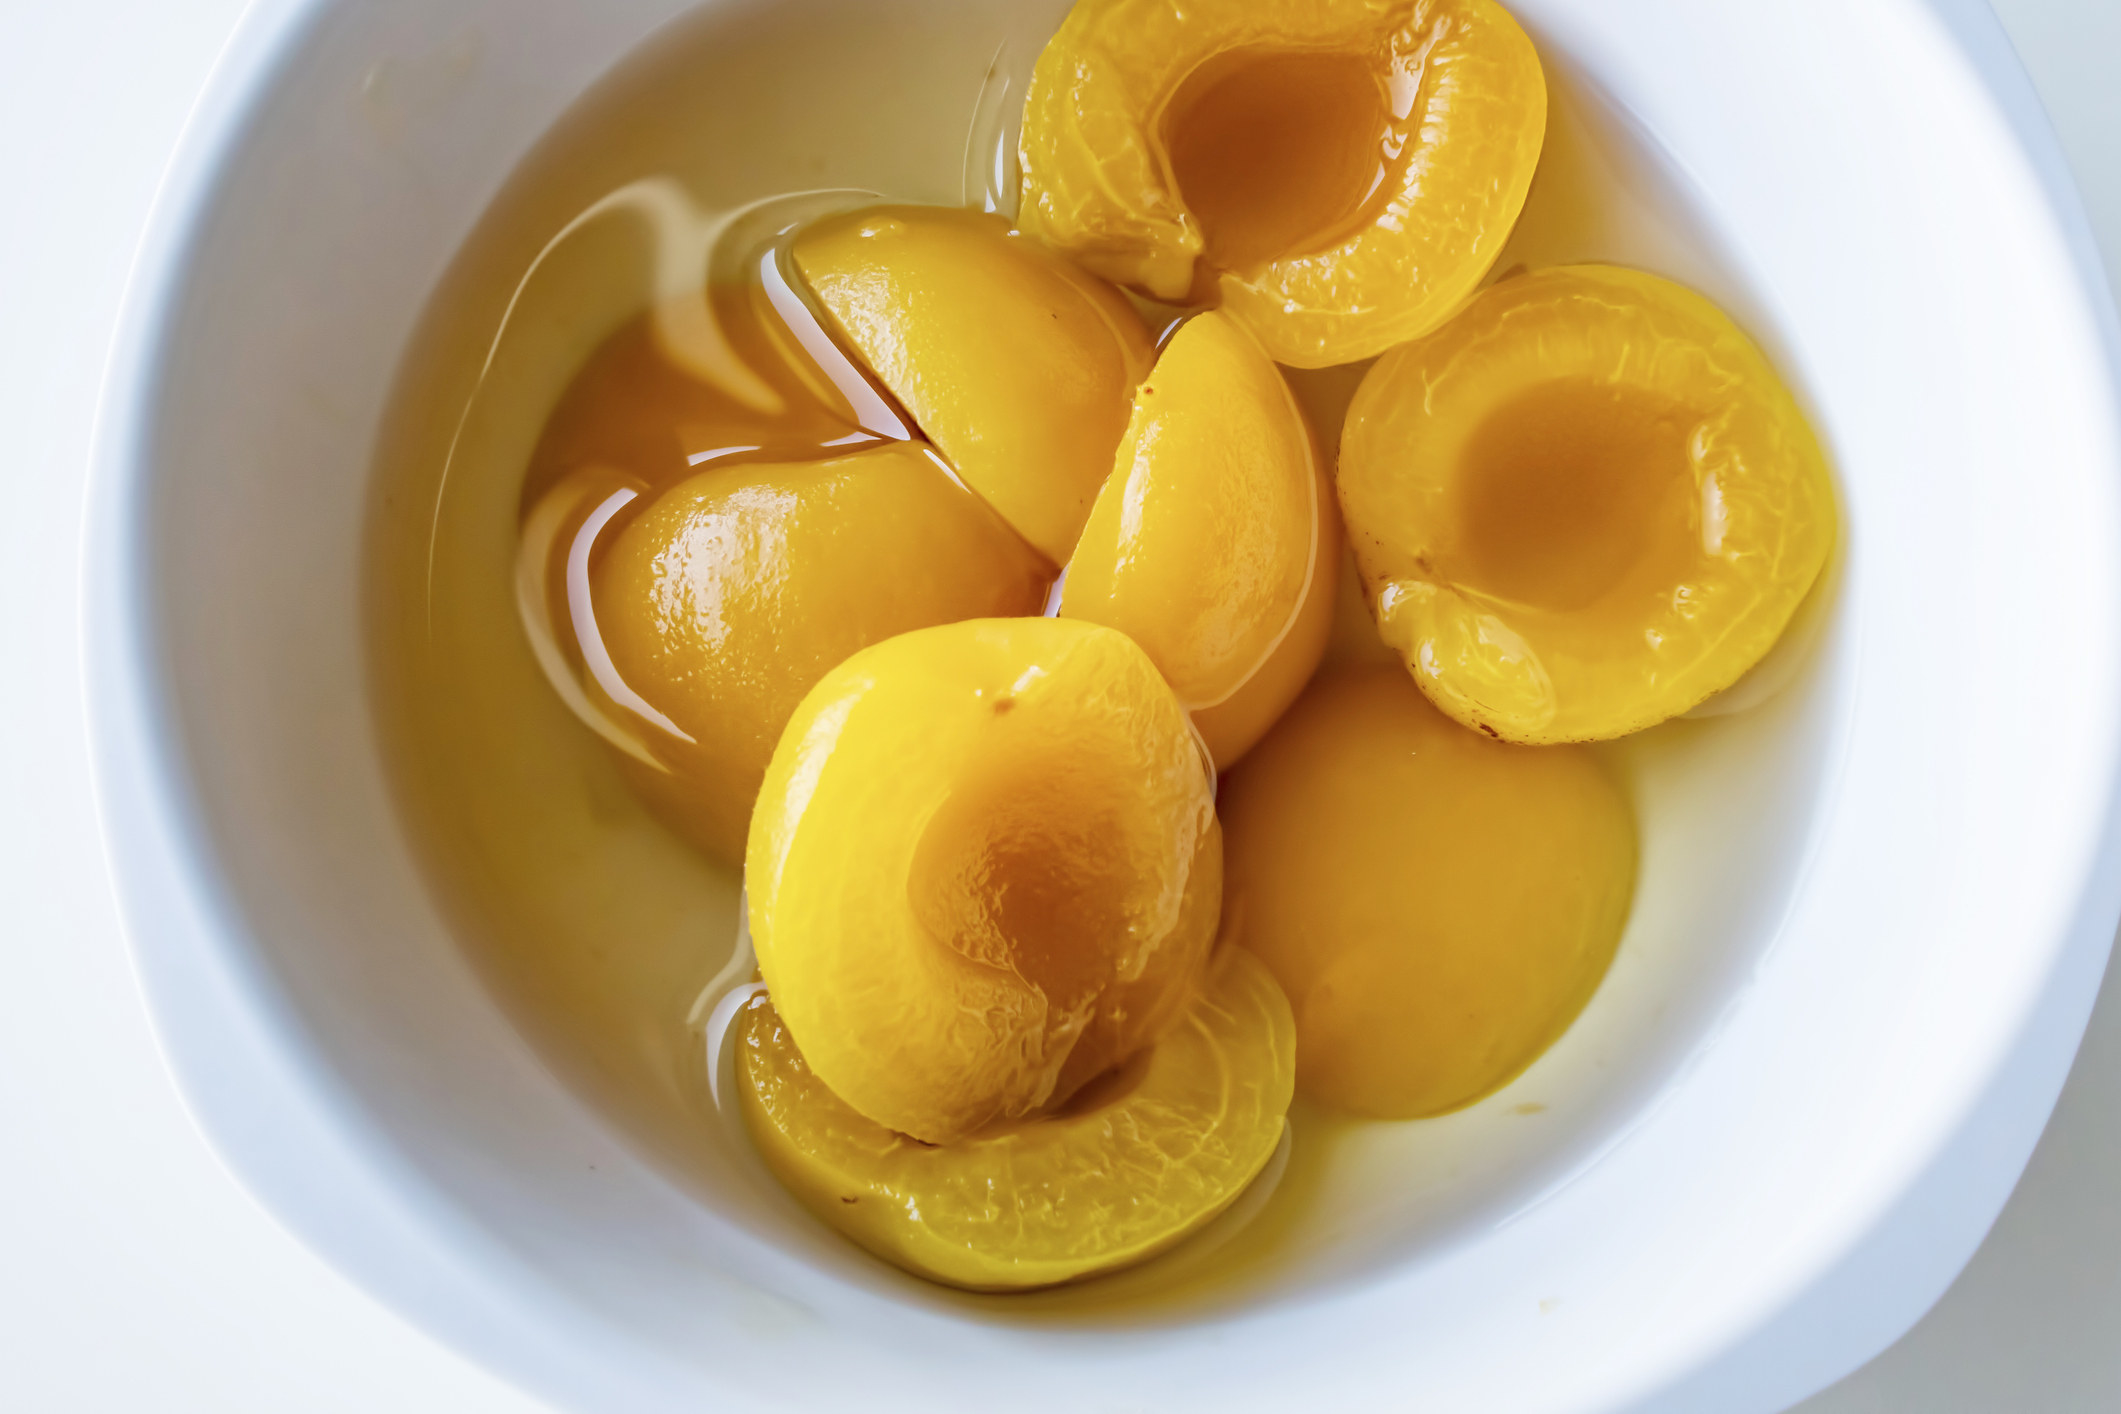 Canned peaches in syrup.